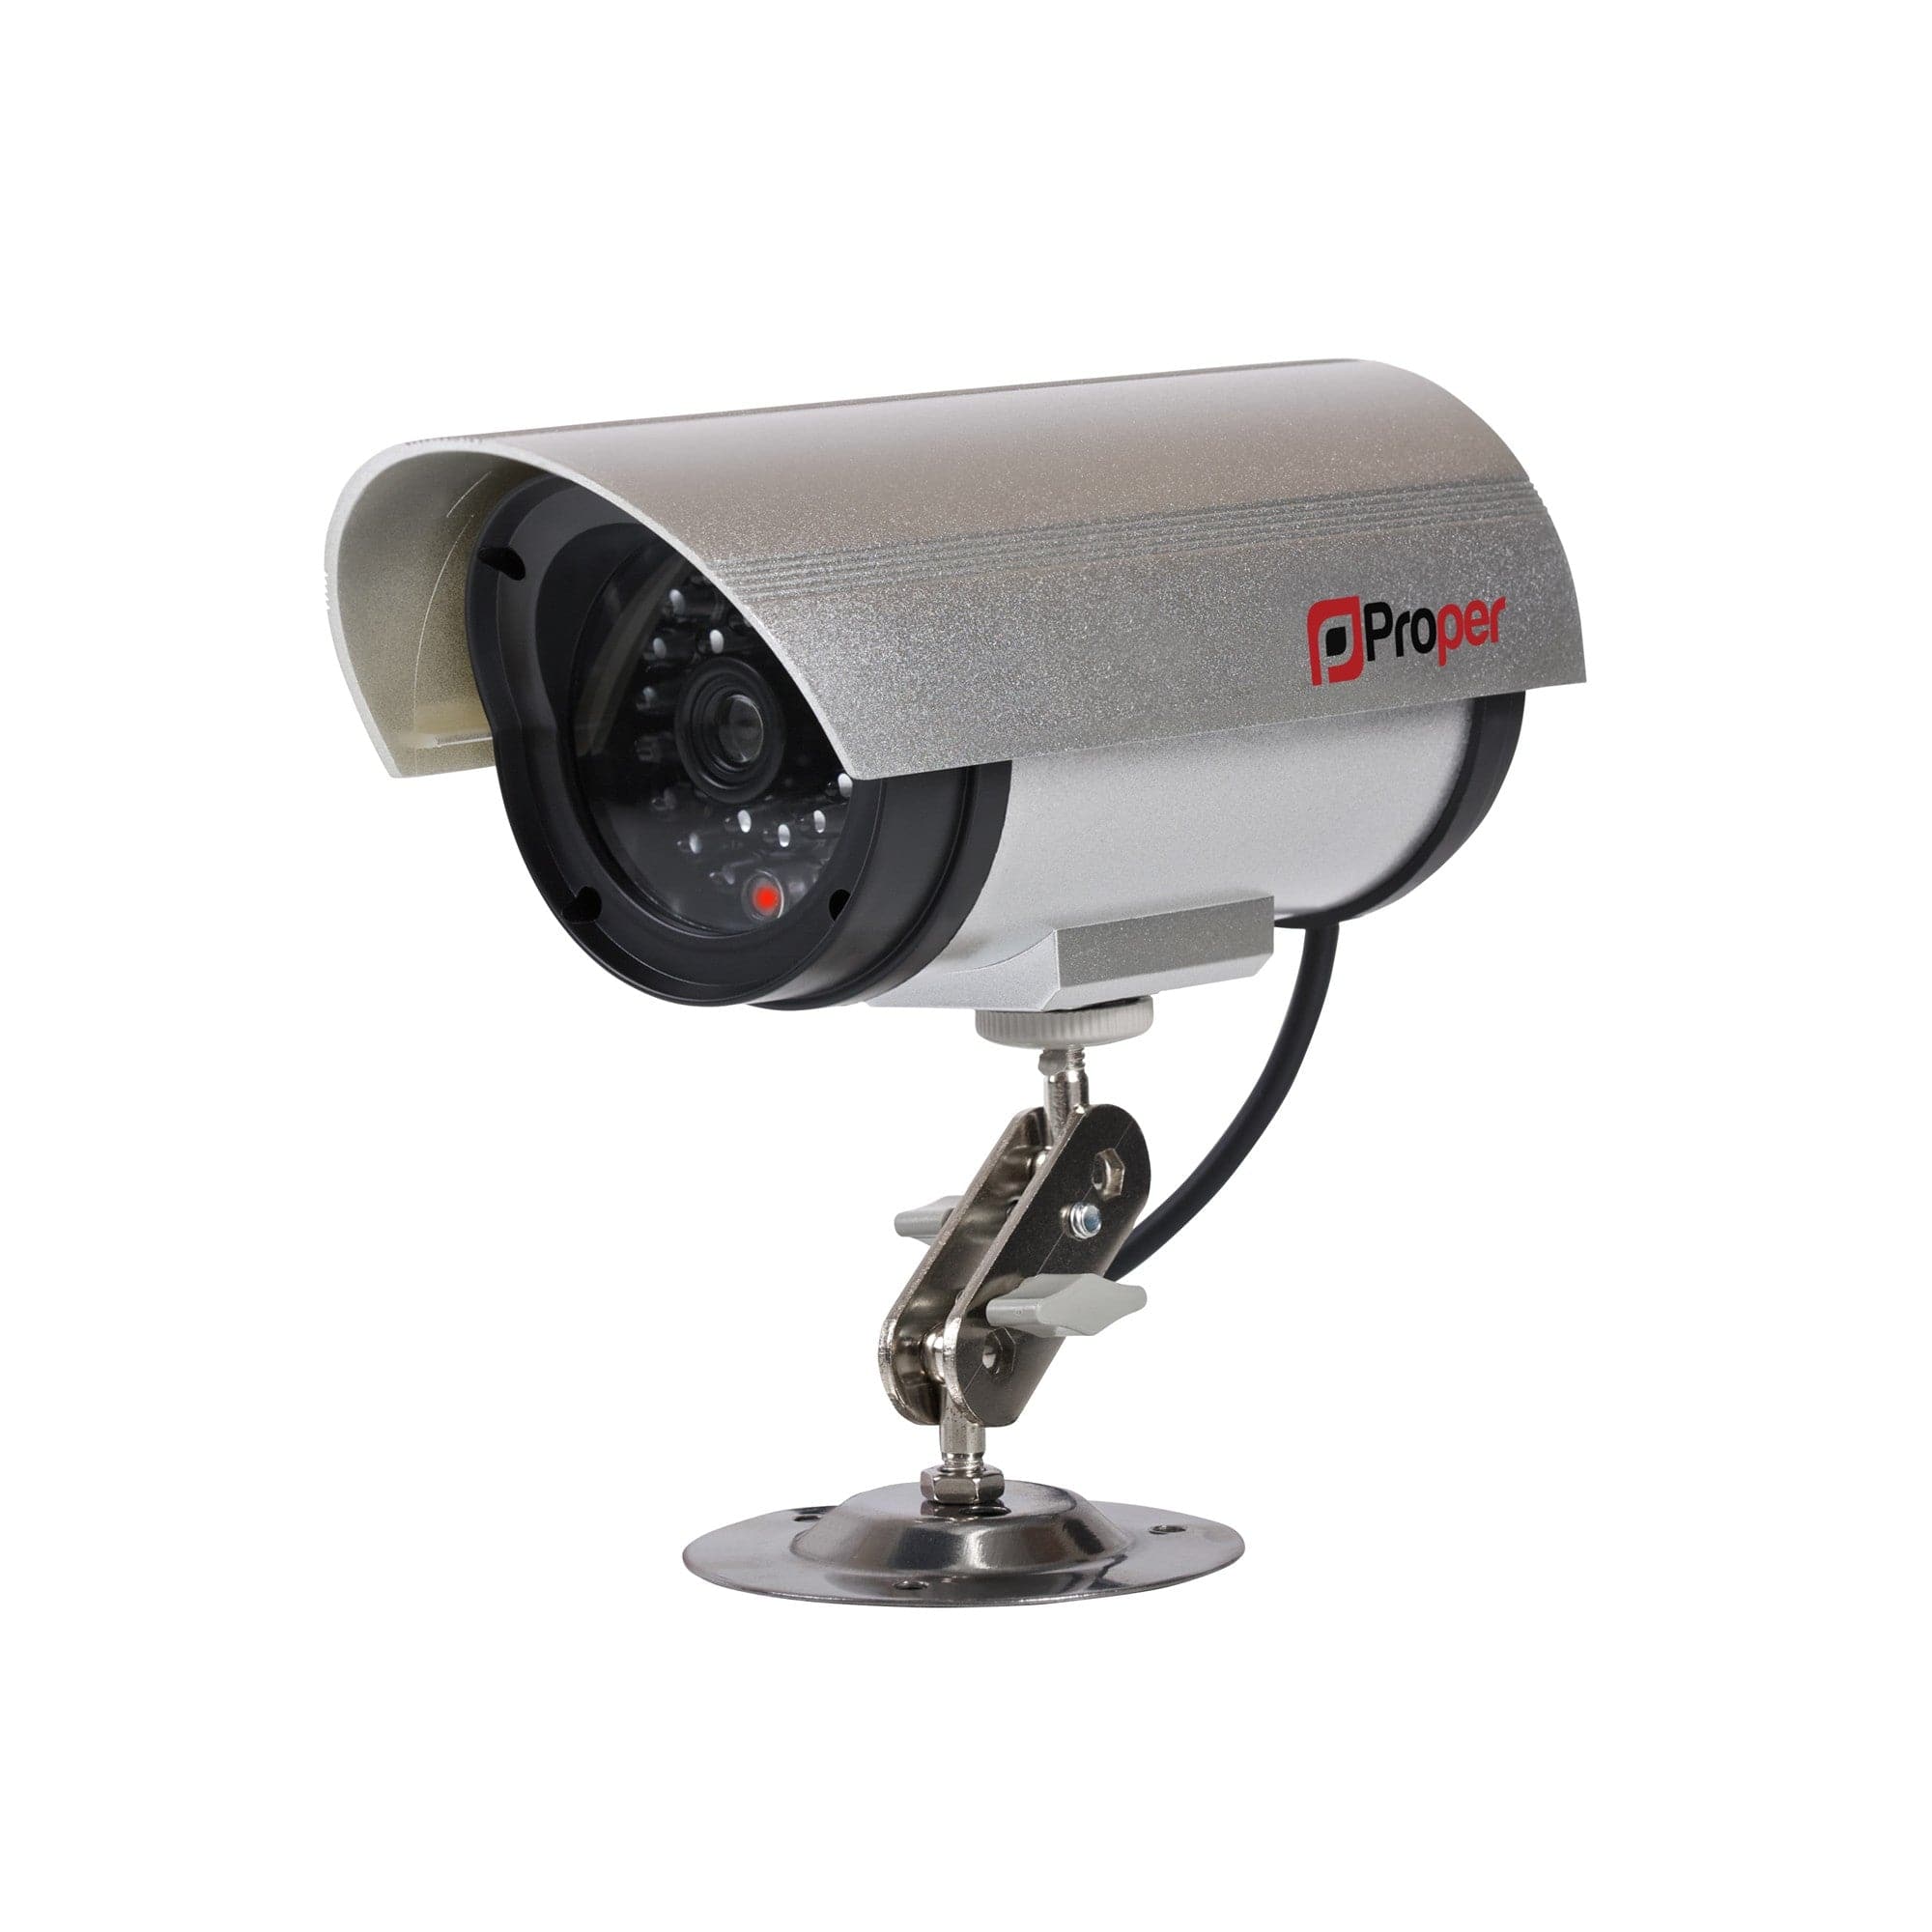 ProperAV Replica Security Camera with LED Flashing Light - Silver